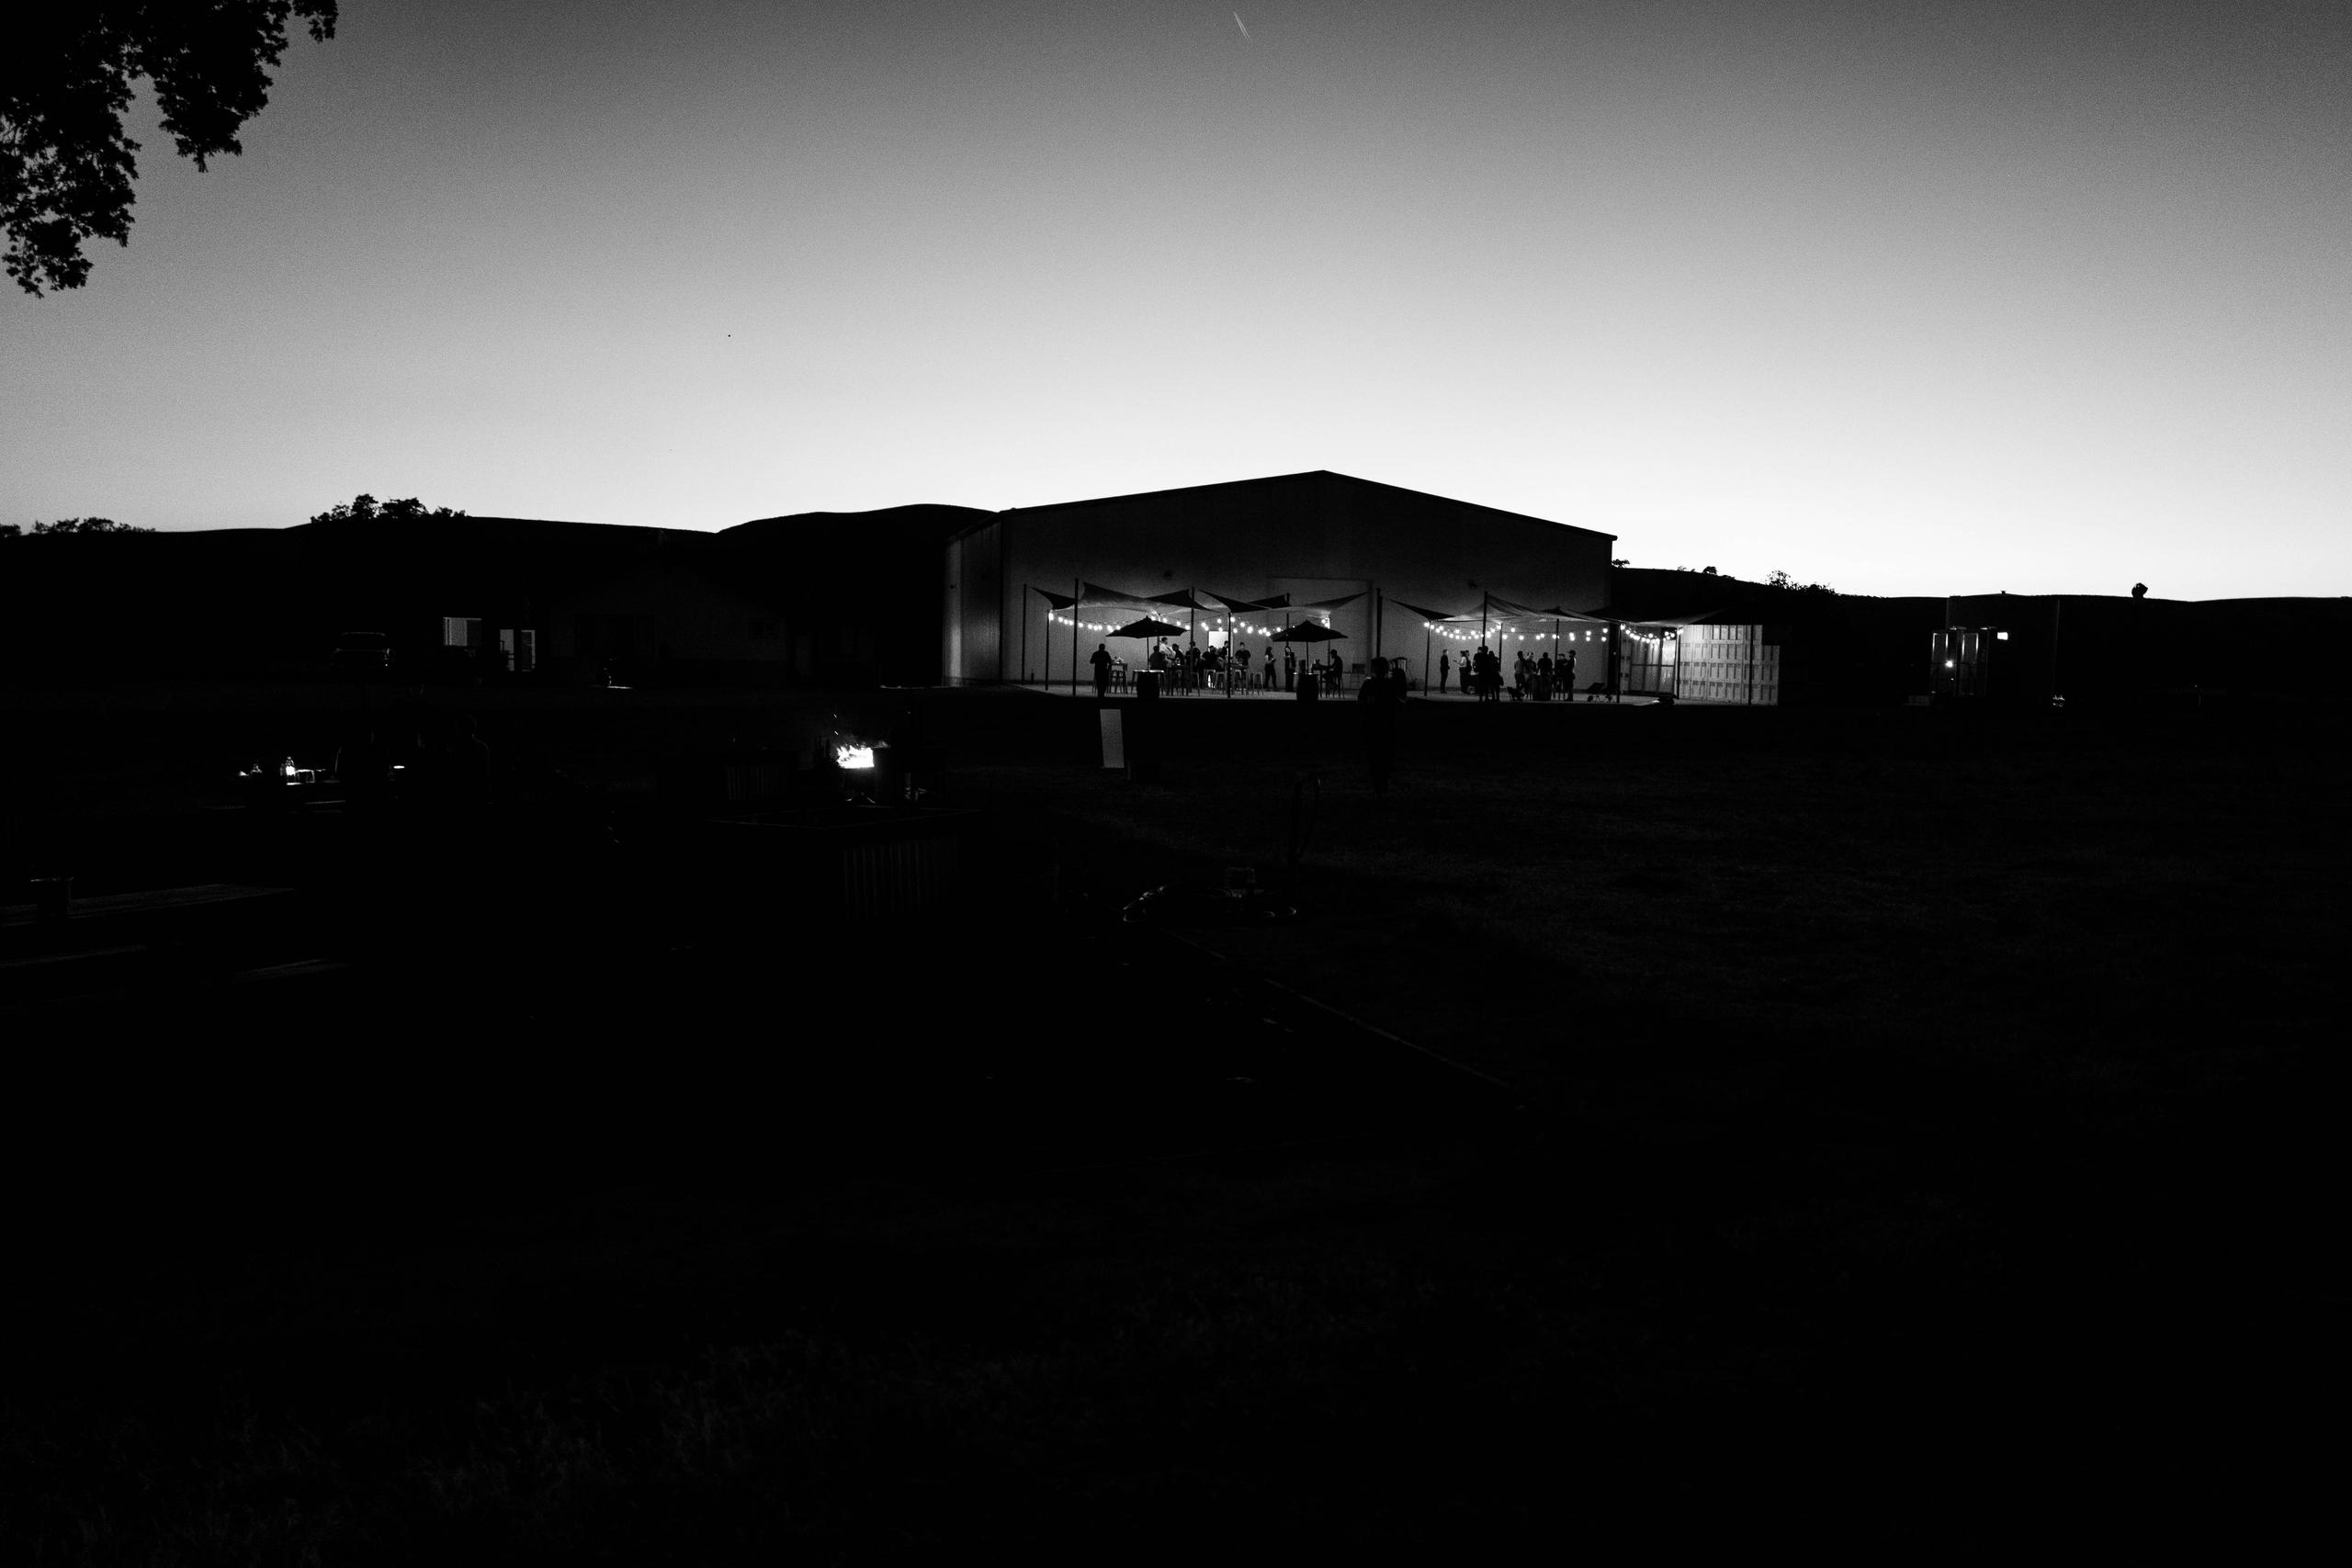 Black and white photo of campsite and winery at night